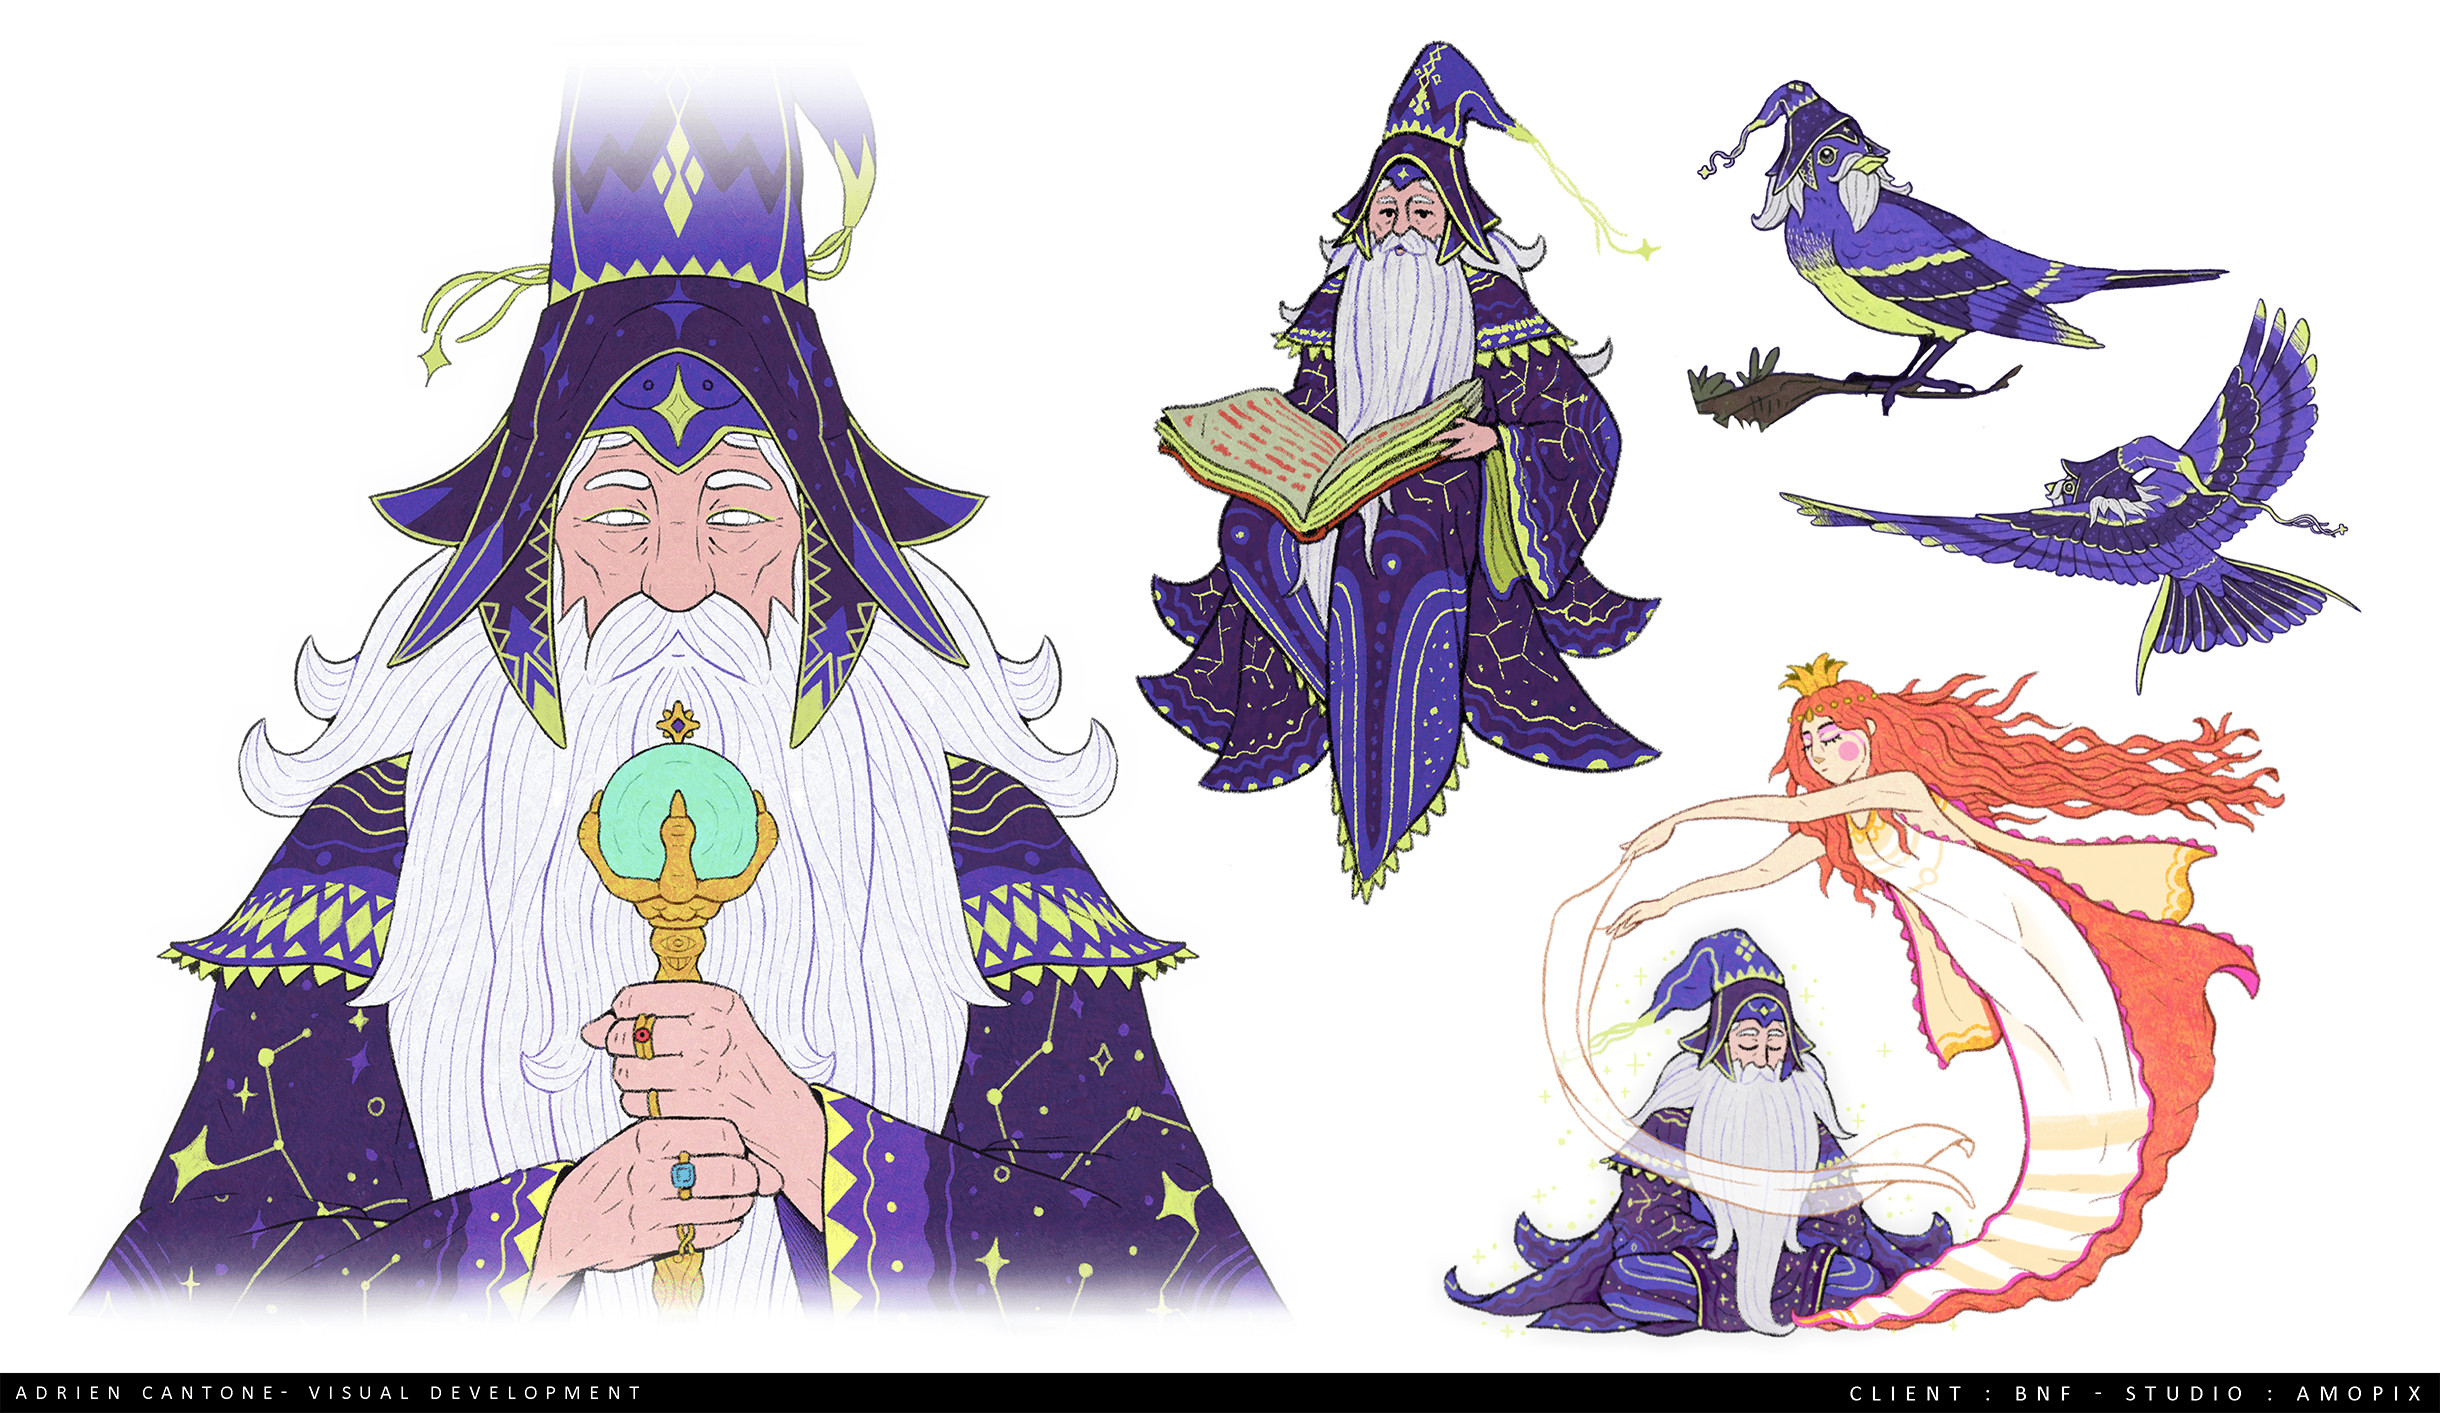 Merlin's Charadesign. we didn't have much time for the research phase so all the characters are drawn directly in the pose they have in the paintings. 